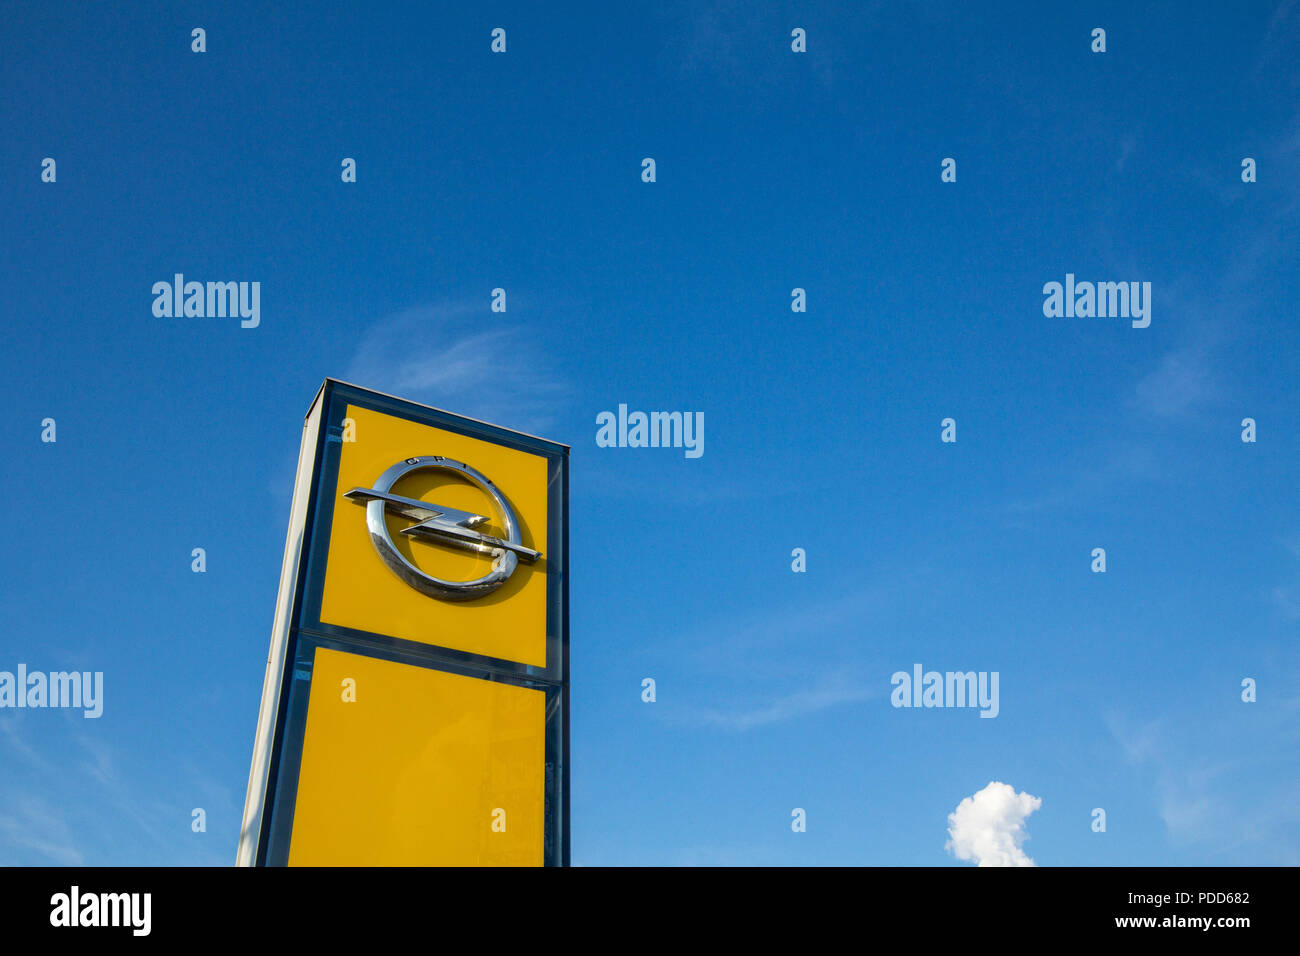 BELGRADE, SERBIA - JULY 29, 2018: Opel logo on their main dealership store Belgrade. Opel is a German car and automotive manufacturer, part of PSA gro Stock Photo